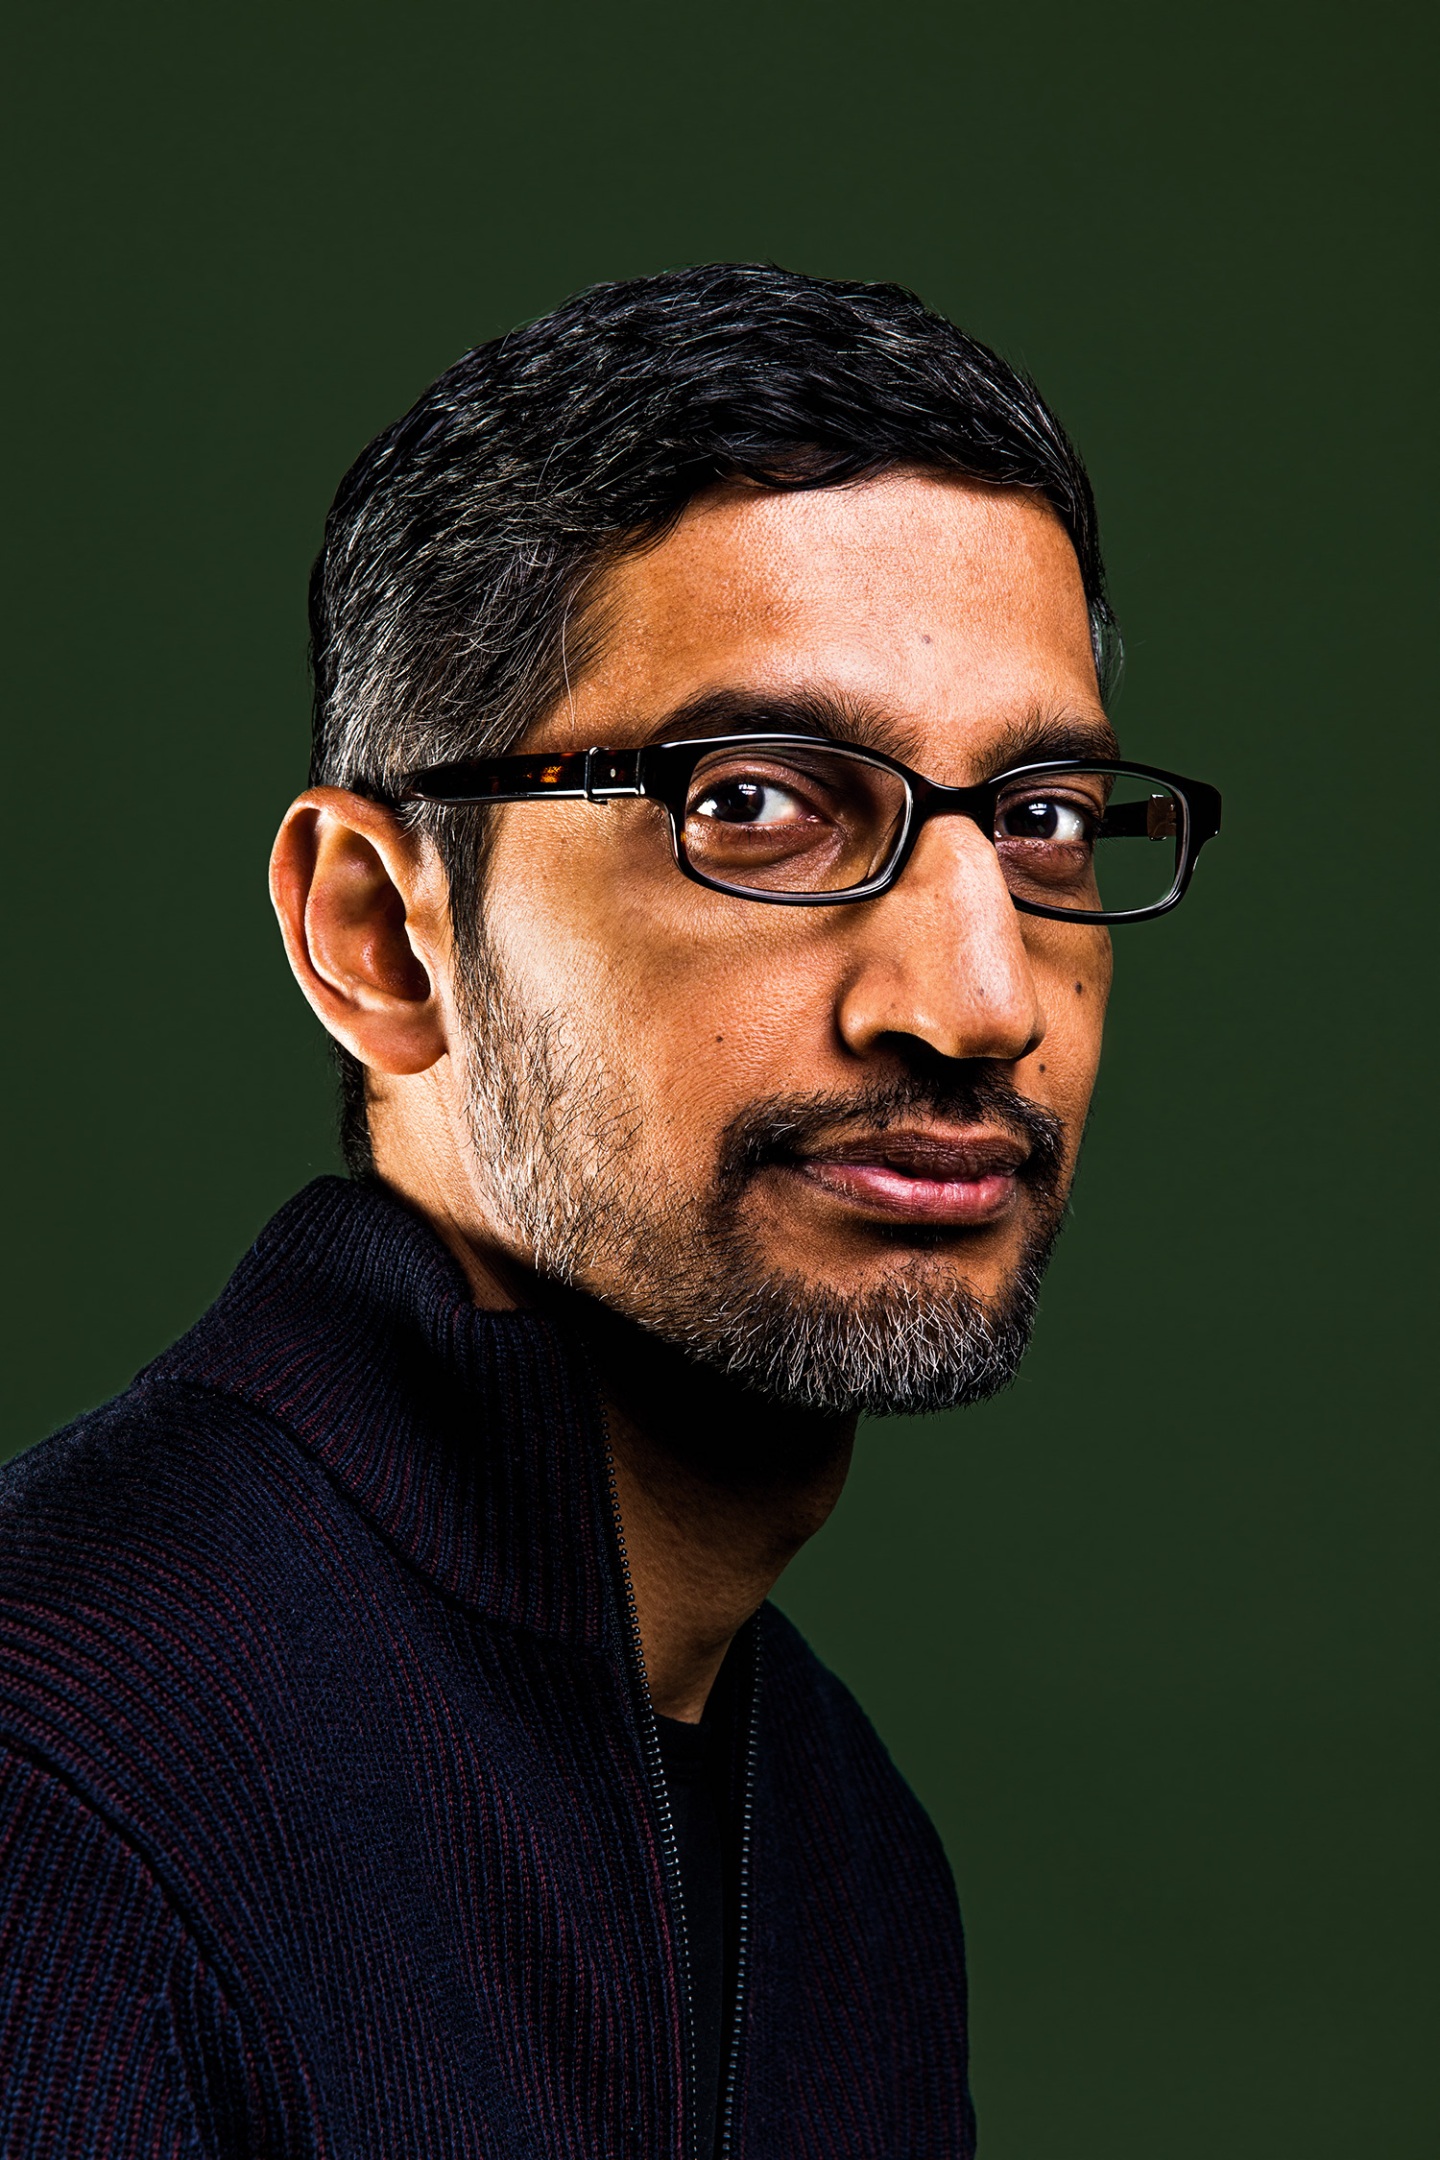 Sundar Pichai photographed at Google in Mountain View, CA on January 9, 2020.